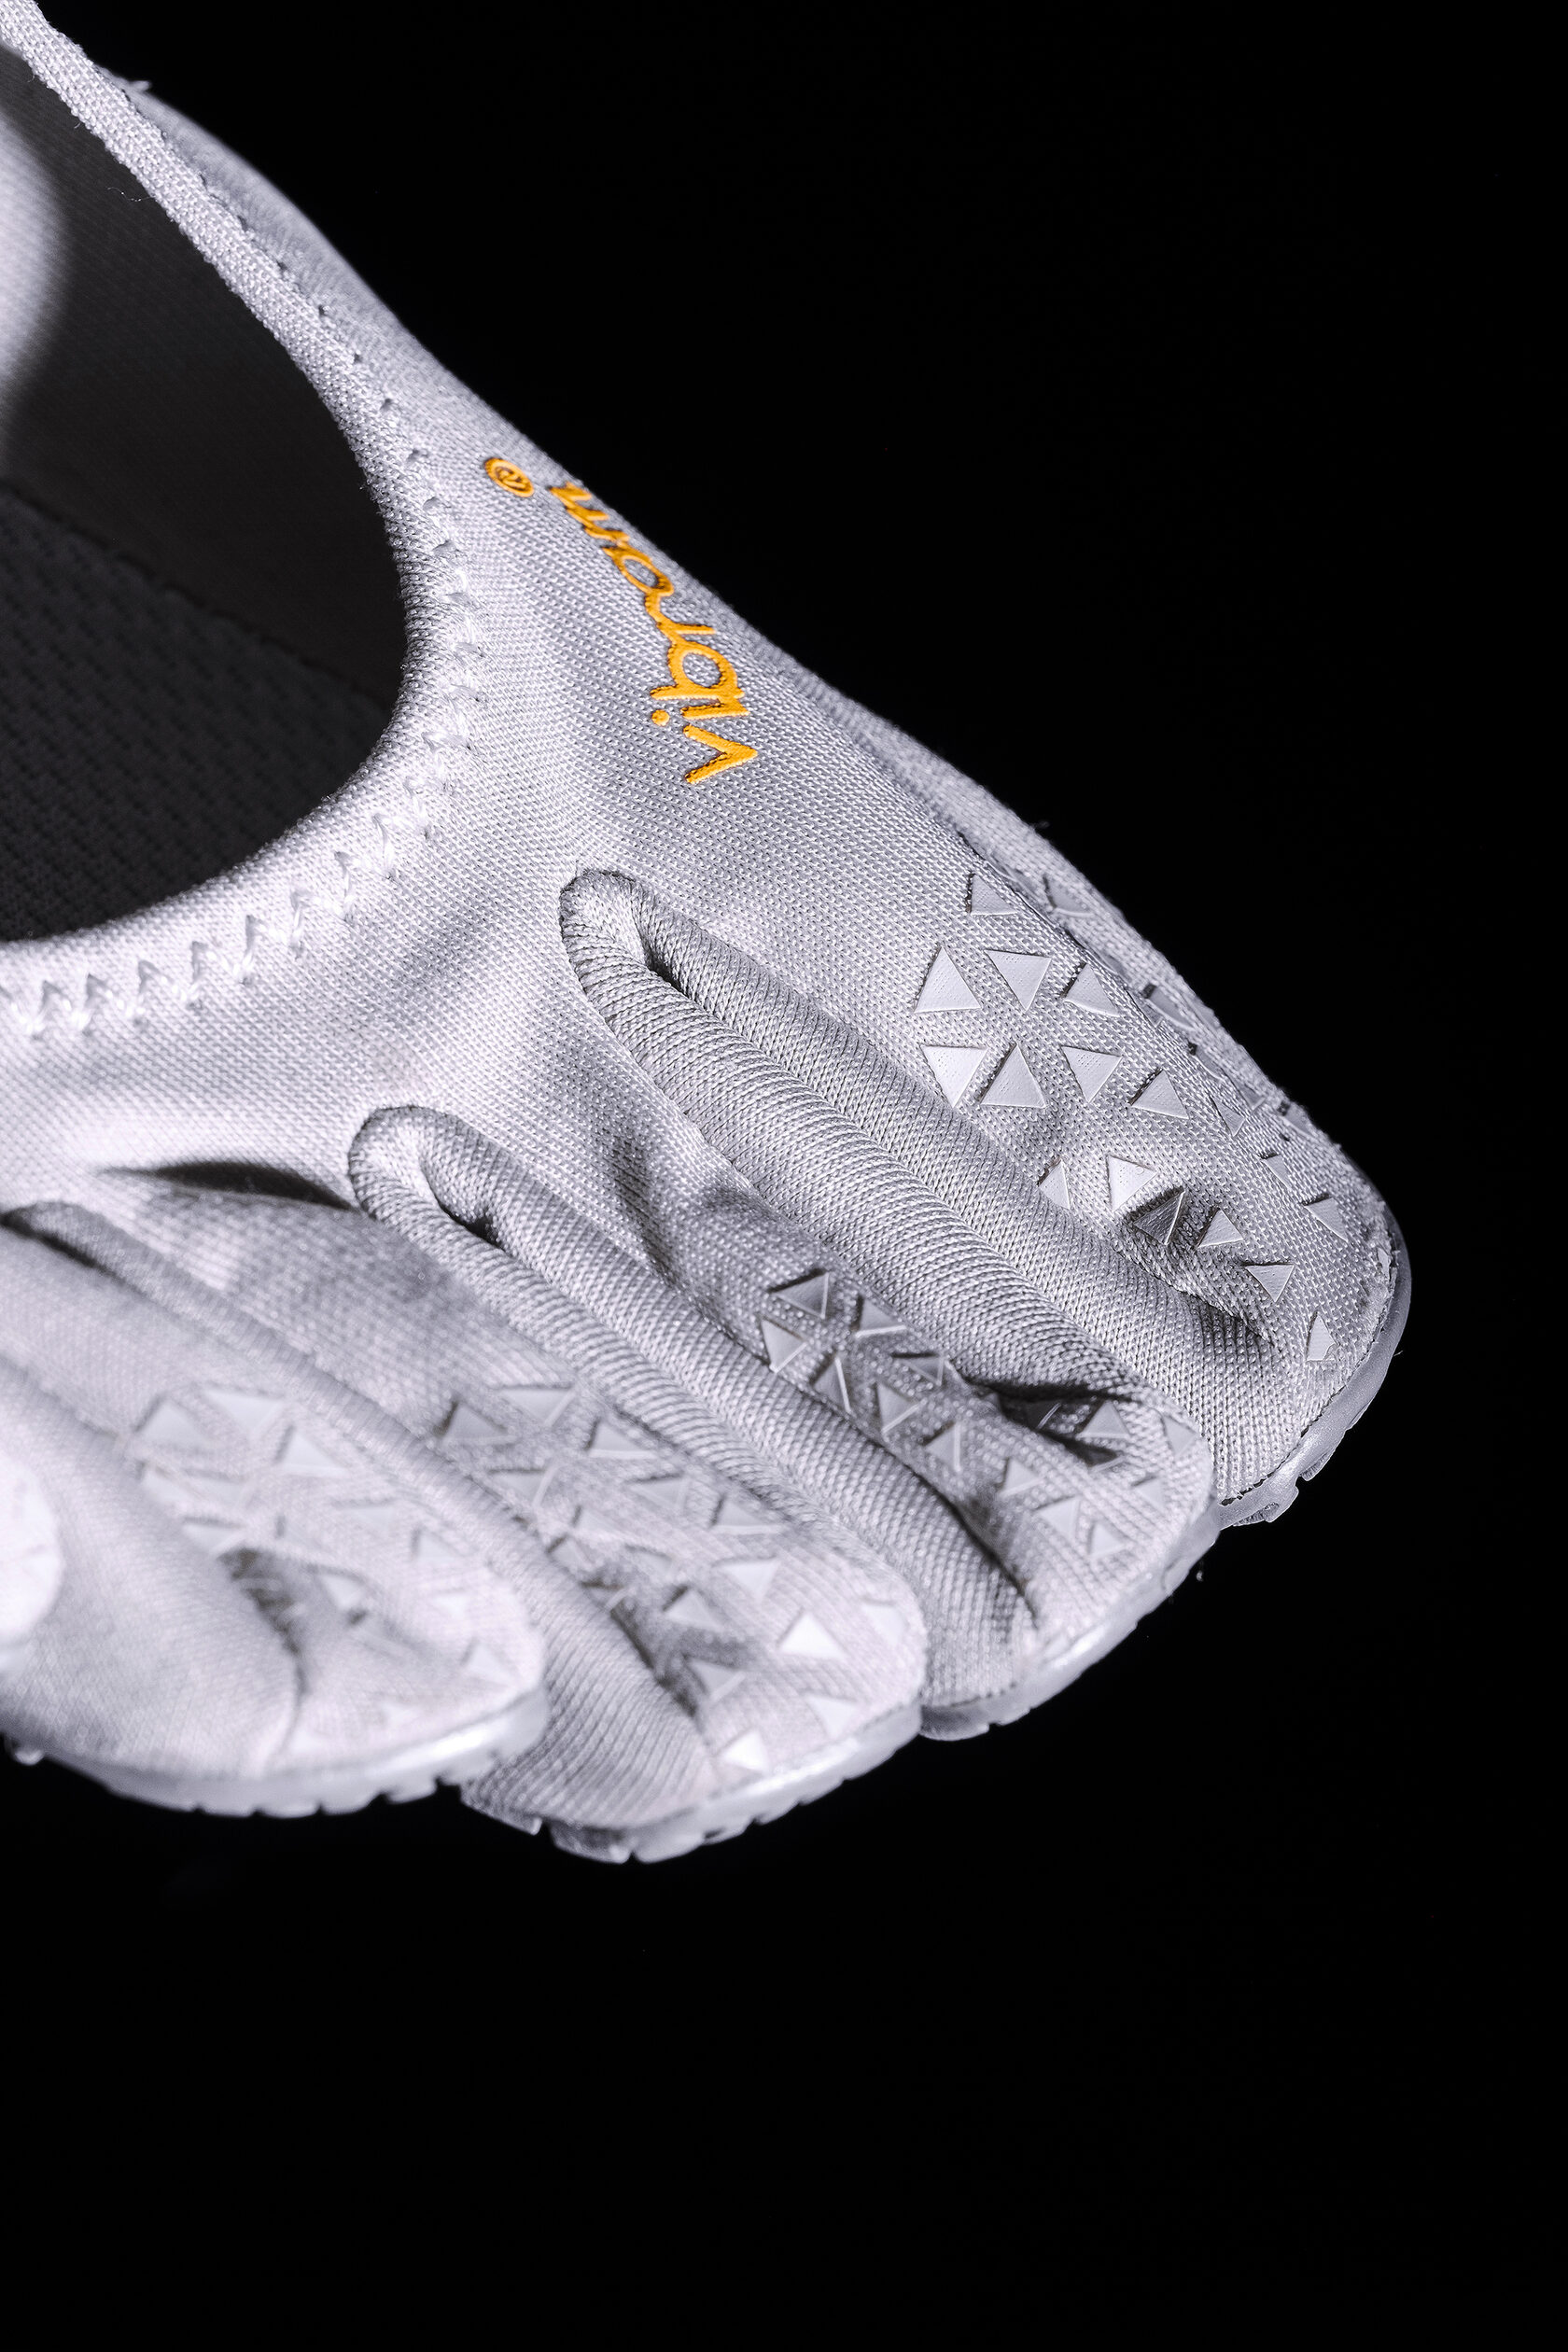 VIBRAM FIVEFINGERS – Your Tool To Feel The Earth [Review]